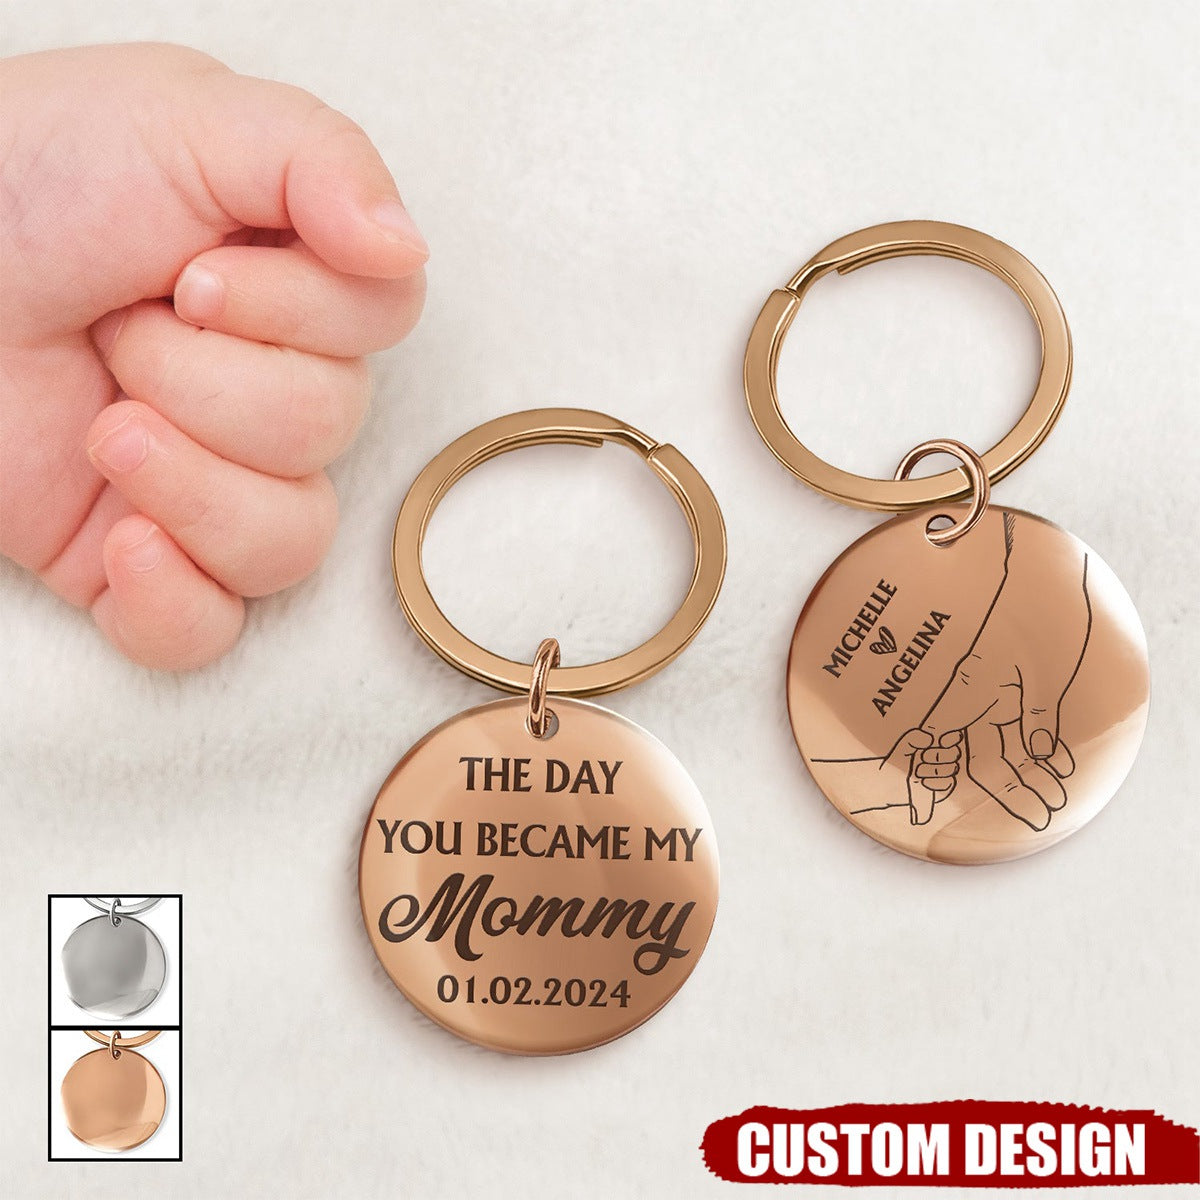 The Day You Became My Mummy/Daddy - Gift For Mom/Dad - Personalized Stainless Steel Keychain